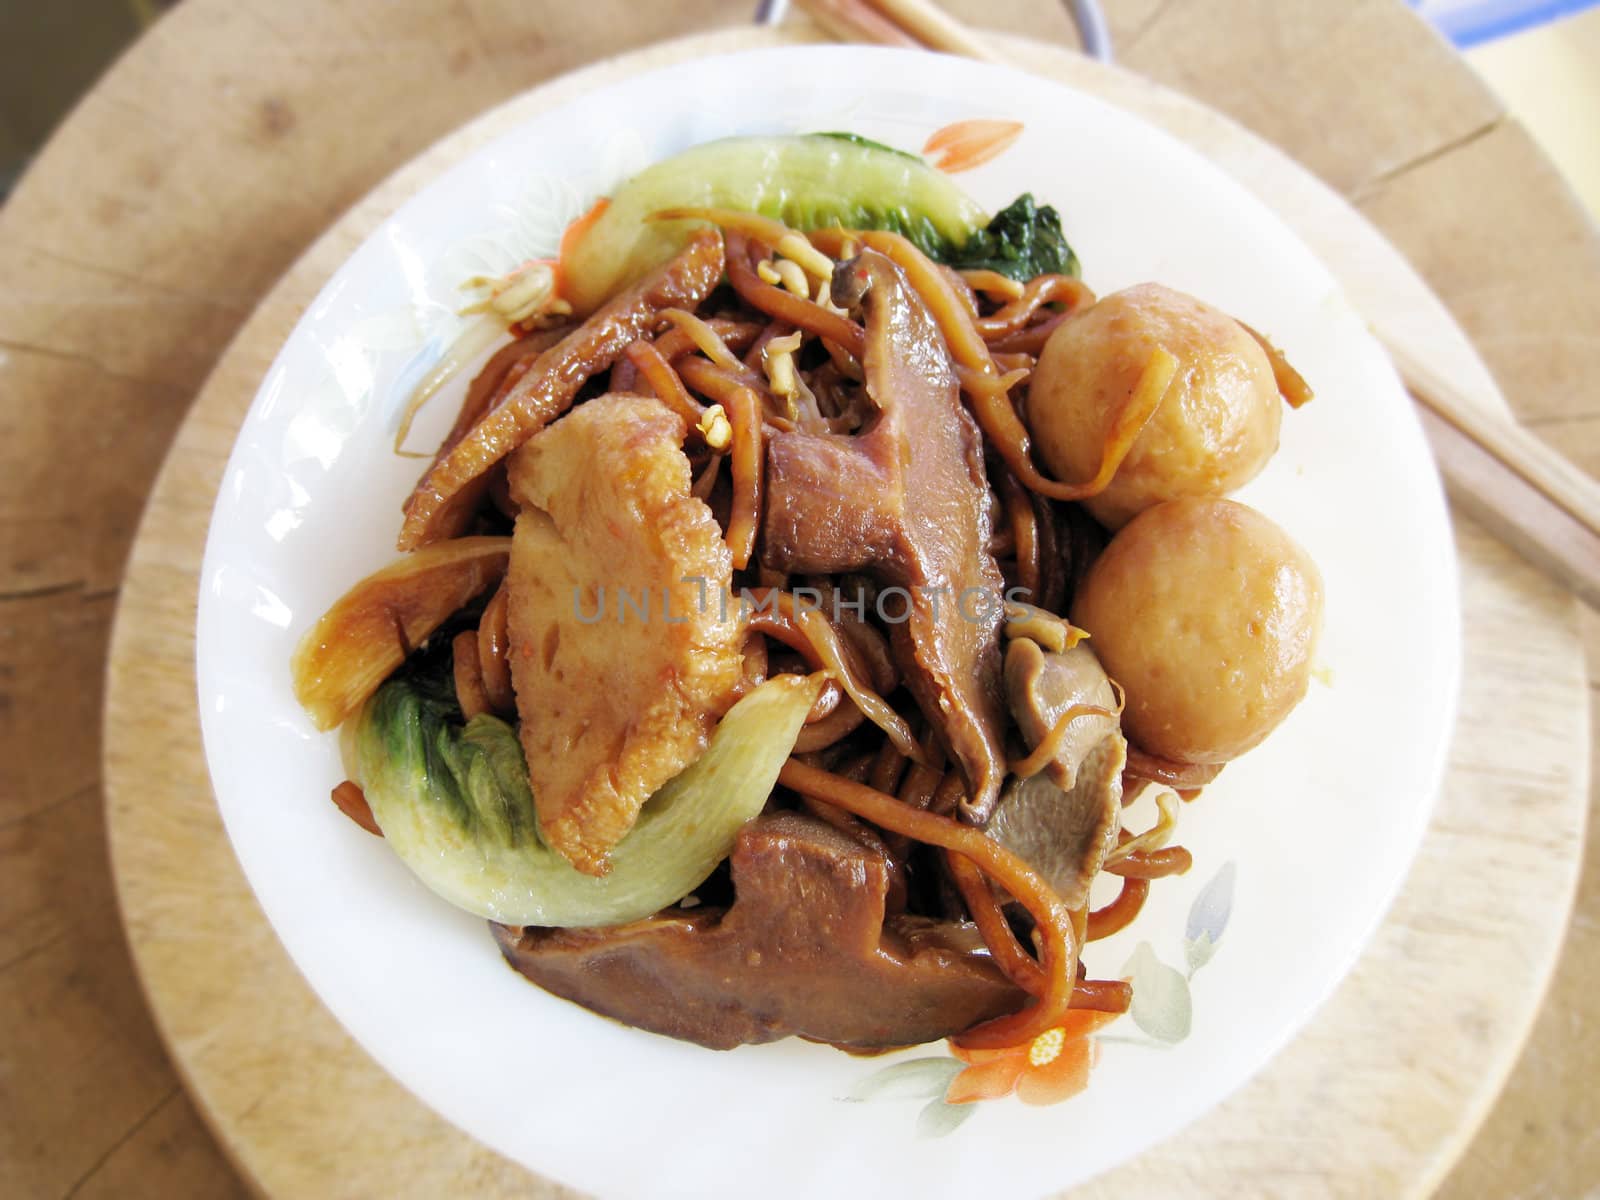 a bowl of fried mee with fish ball, fish paste, mushroom, vegetables. asian food